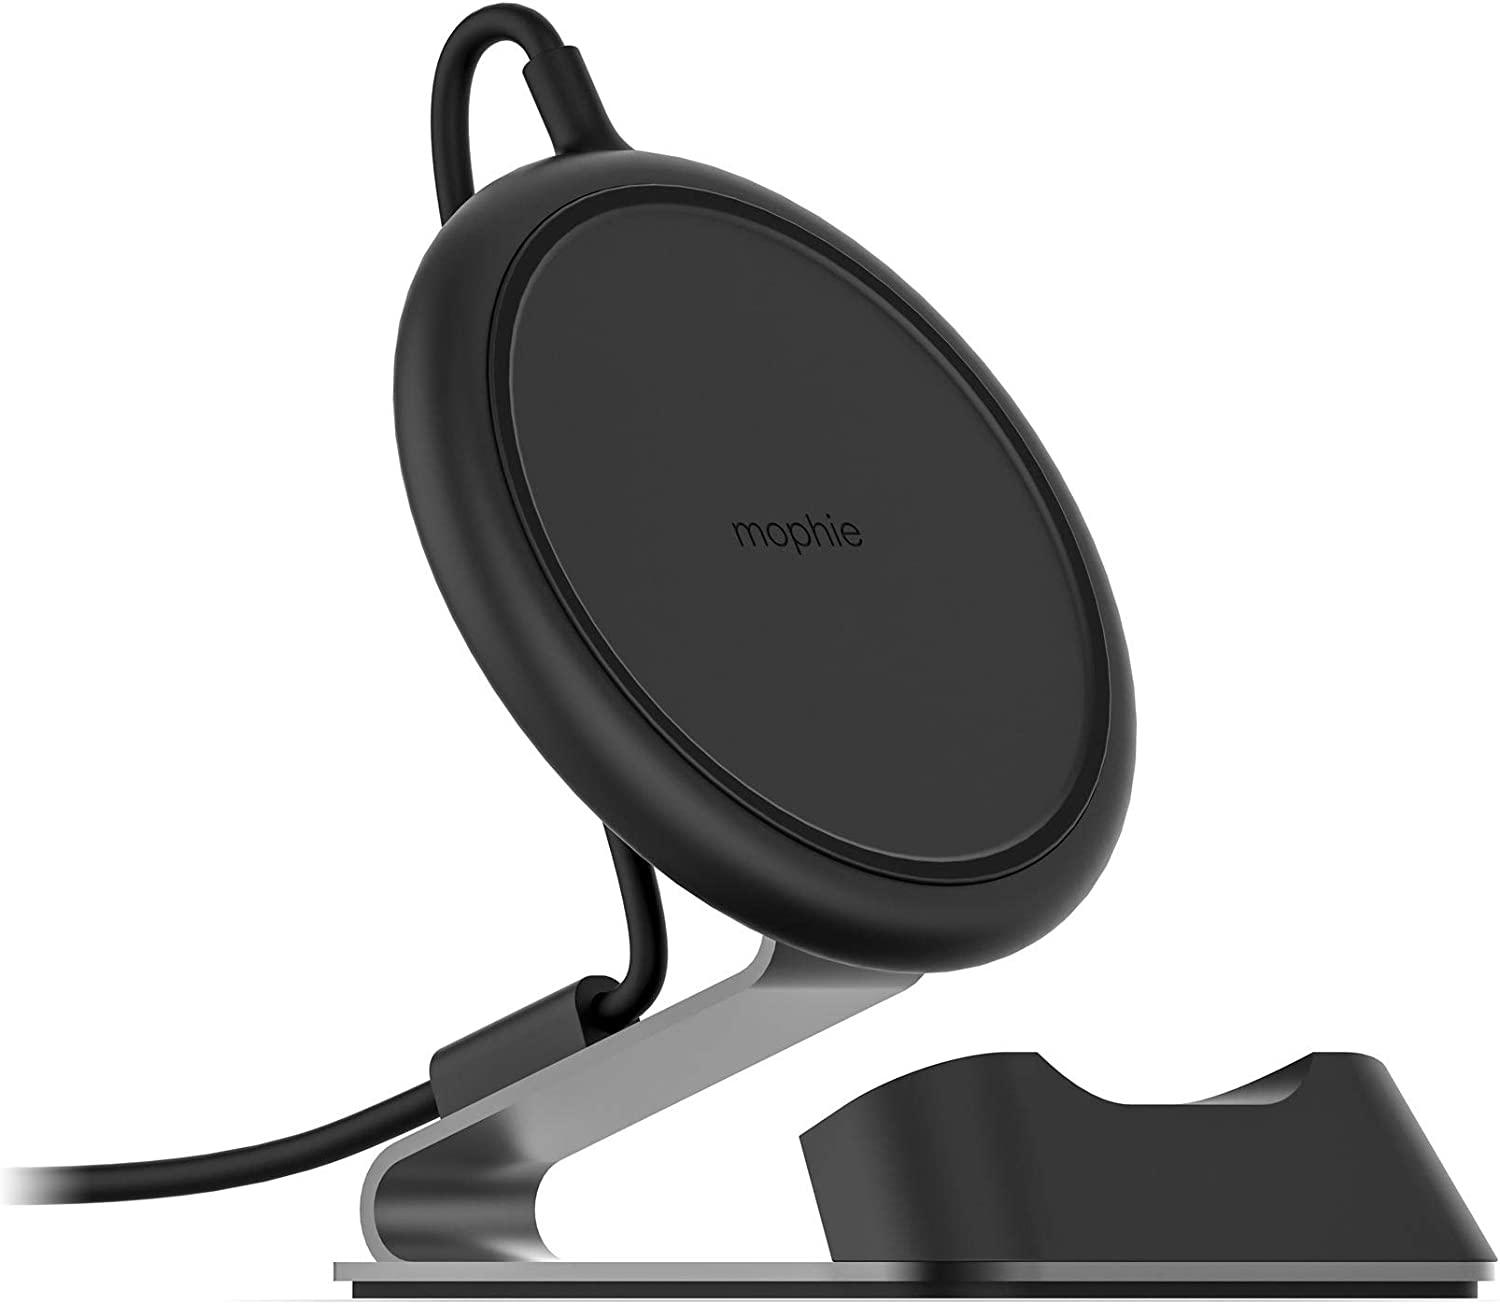 Mophie's wireless charger has a simple design.